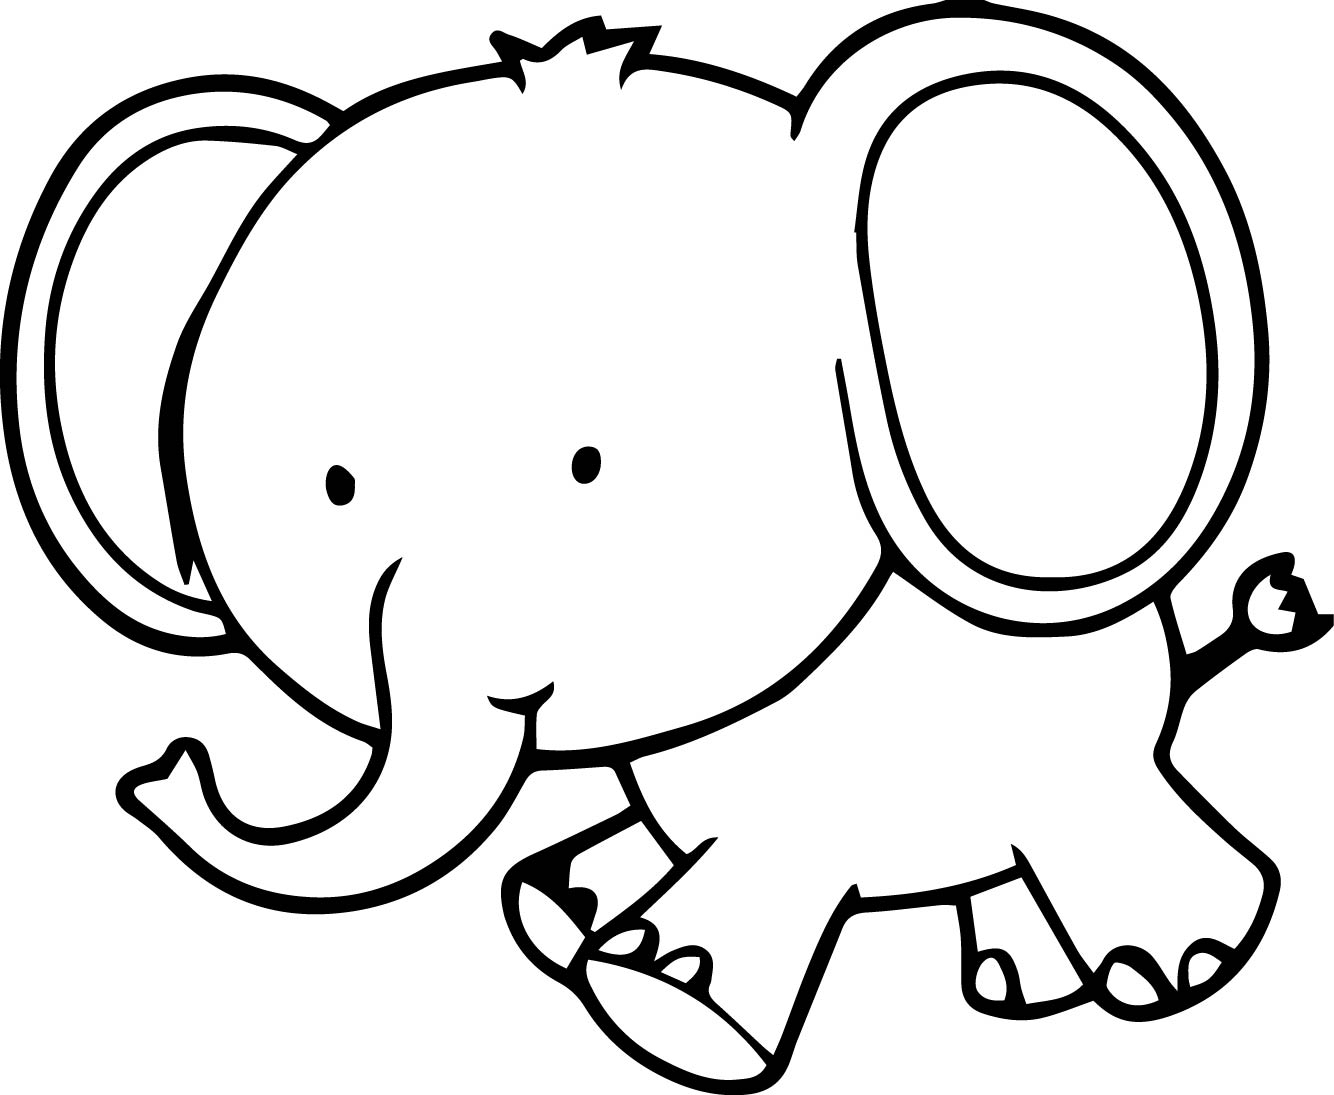 Elephant Coloring Pages For Preschool Color Page Elephant 9 1425